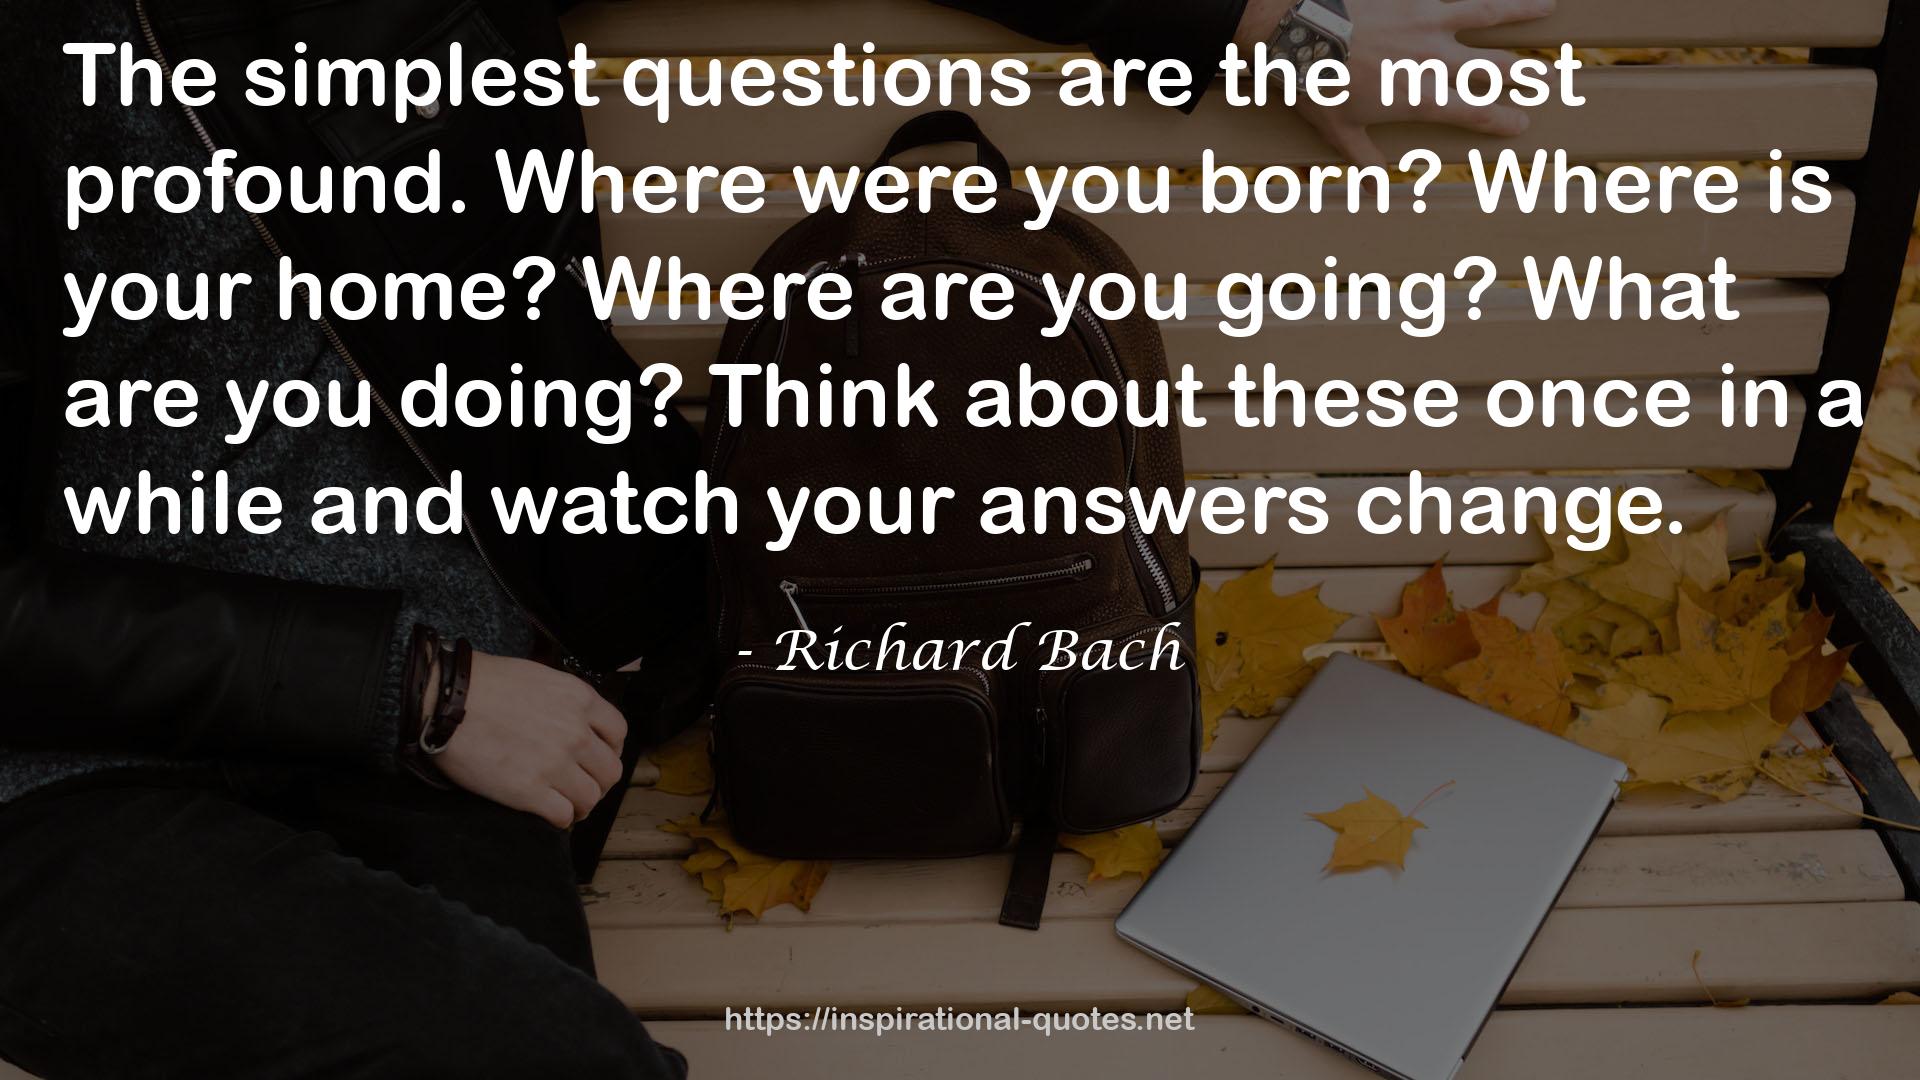 Richard Bach QUOTES